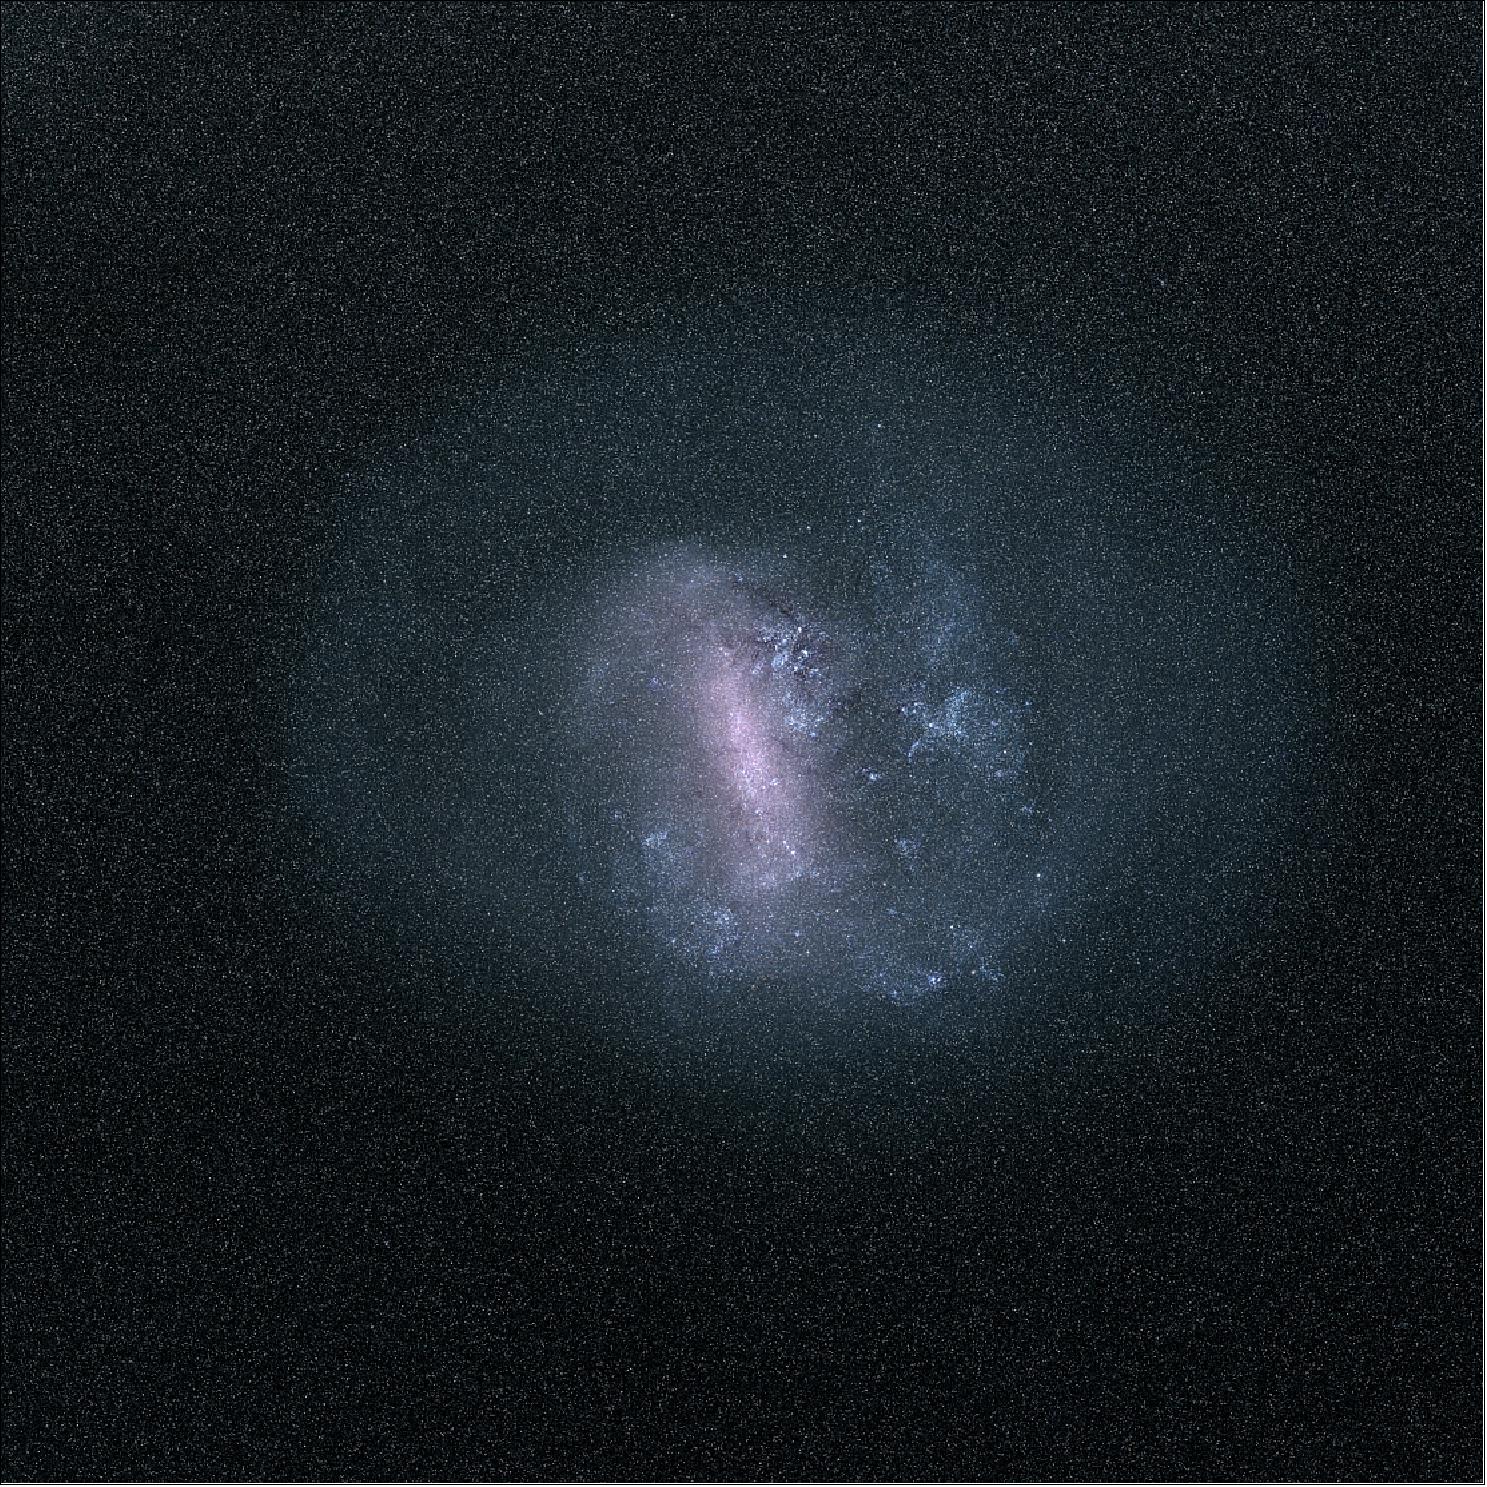 Figure 36: The Large Magellanic Cloud (LMC), one of the nearest galaxies to our Milky Way, as viewed by ESA's Gaia satellite using information from the mission's second data release. This view is not a photograph but has been compiled by mapping the total amount of radiation detected by Gaia in each pixel, combined with measurements of the radiation taken through different filters on the spacecraft to generate color information [image credit: ESA/Gaia/DPAC (Data Processing and Analysis Consortium); A. Moitinho / A. F. Silva / M. Barros / C. Barata, University of Lisbon, Portugal; H. Savietto, Fork Research, Portugal]